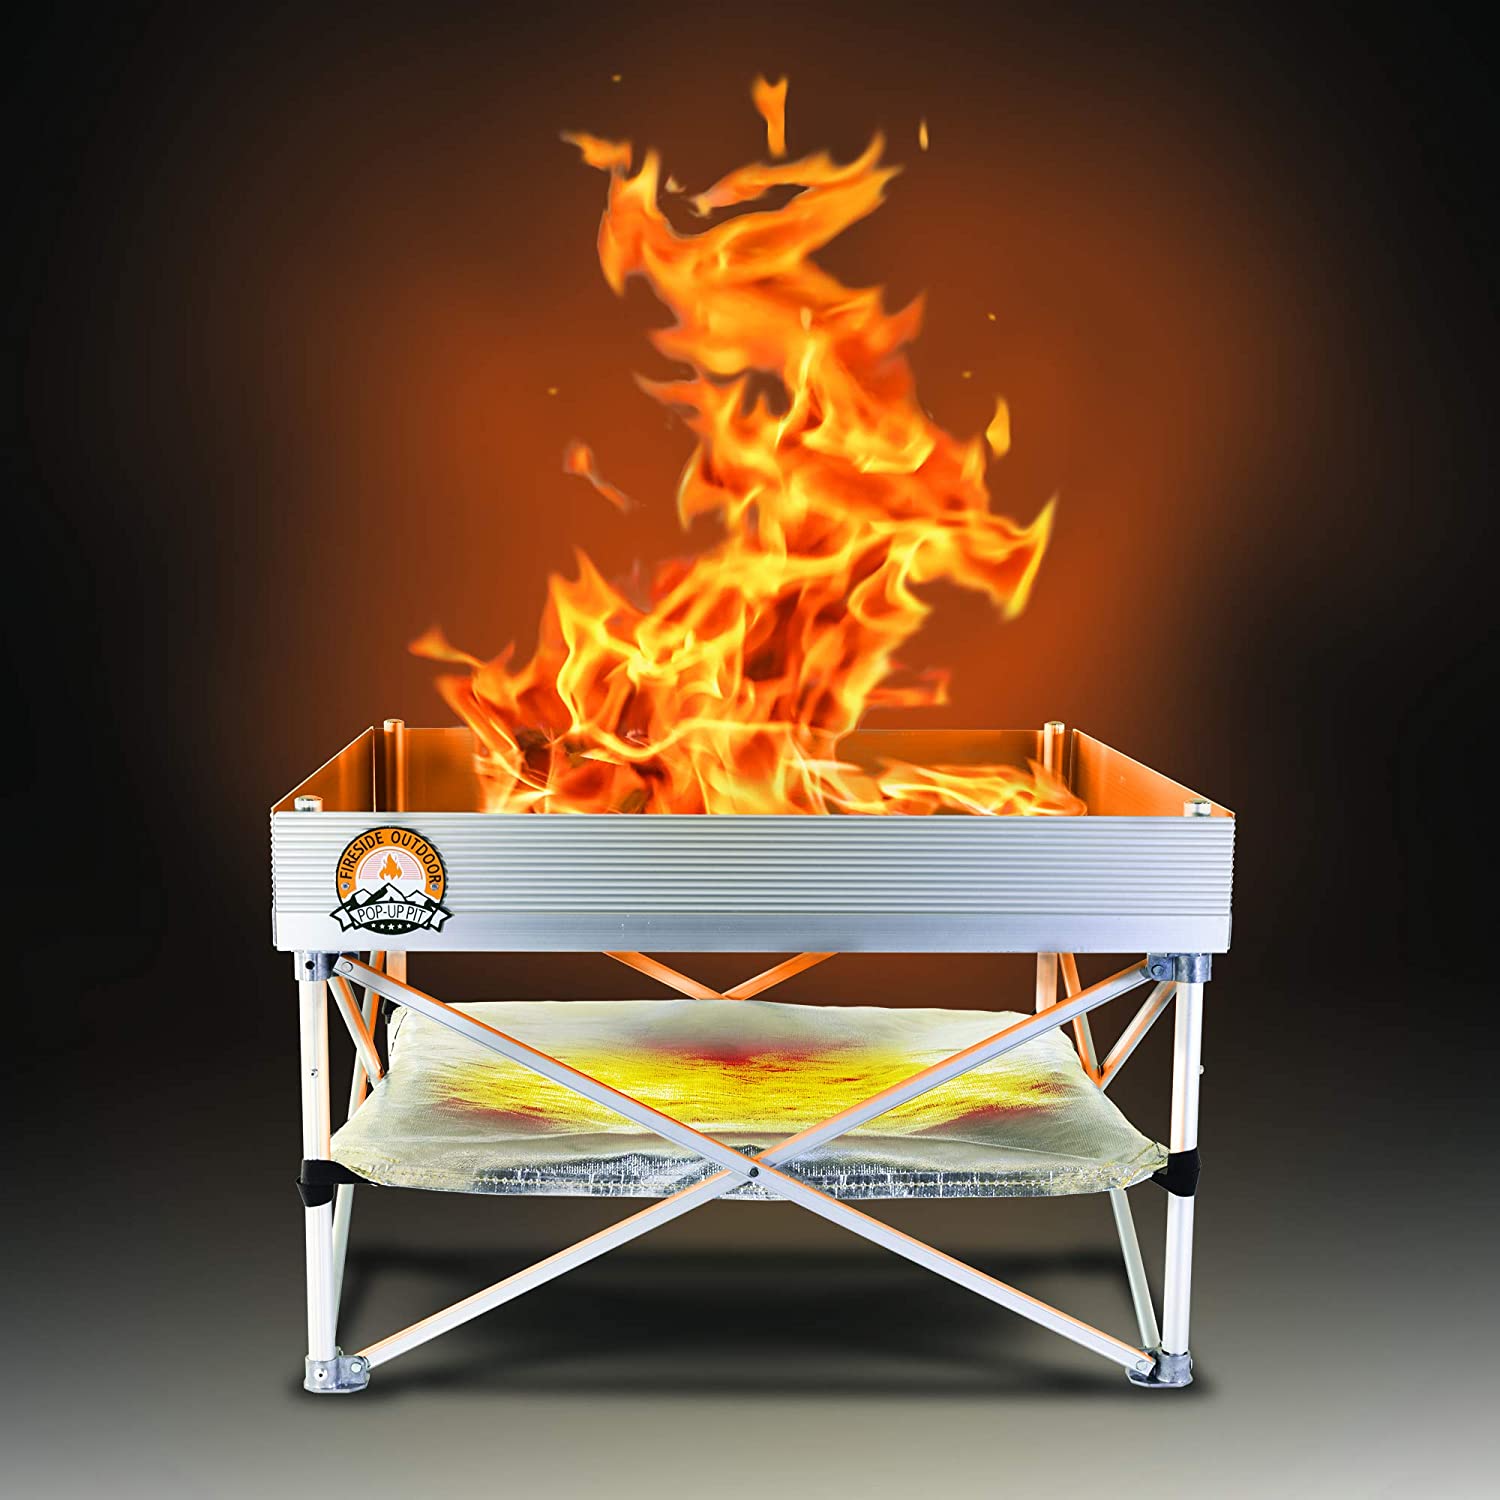 Top Portable Fire Pit For Camping, Are Fire Pits Bad For The Environment Uk